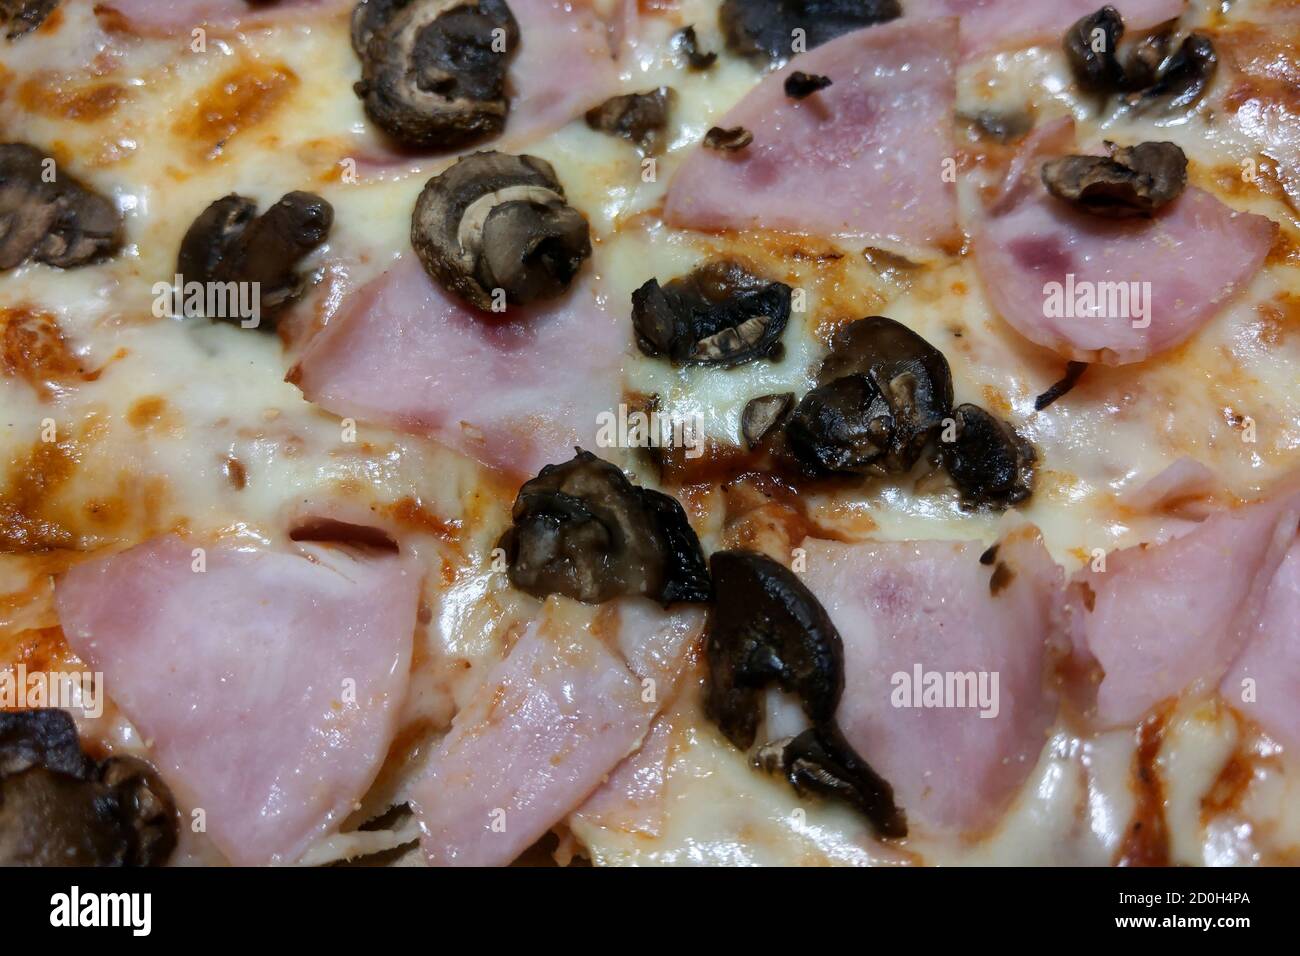 Top view of delicious hot chain pizza Stock Photo